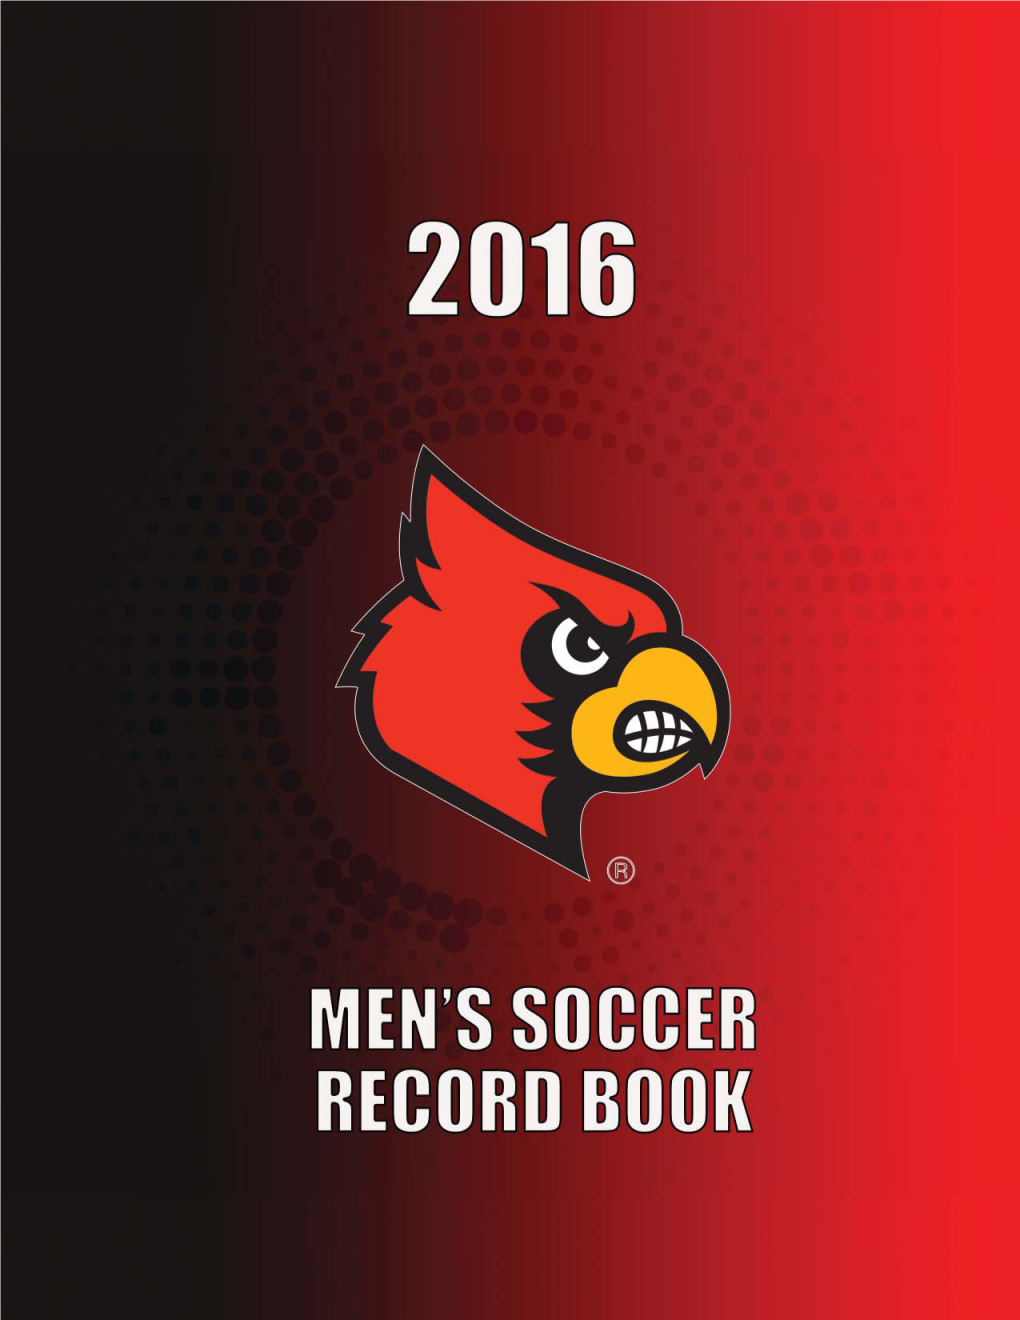 2016 Uofl M-Soccer Record Book.Indd